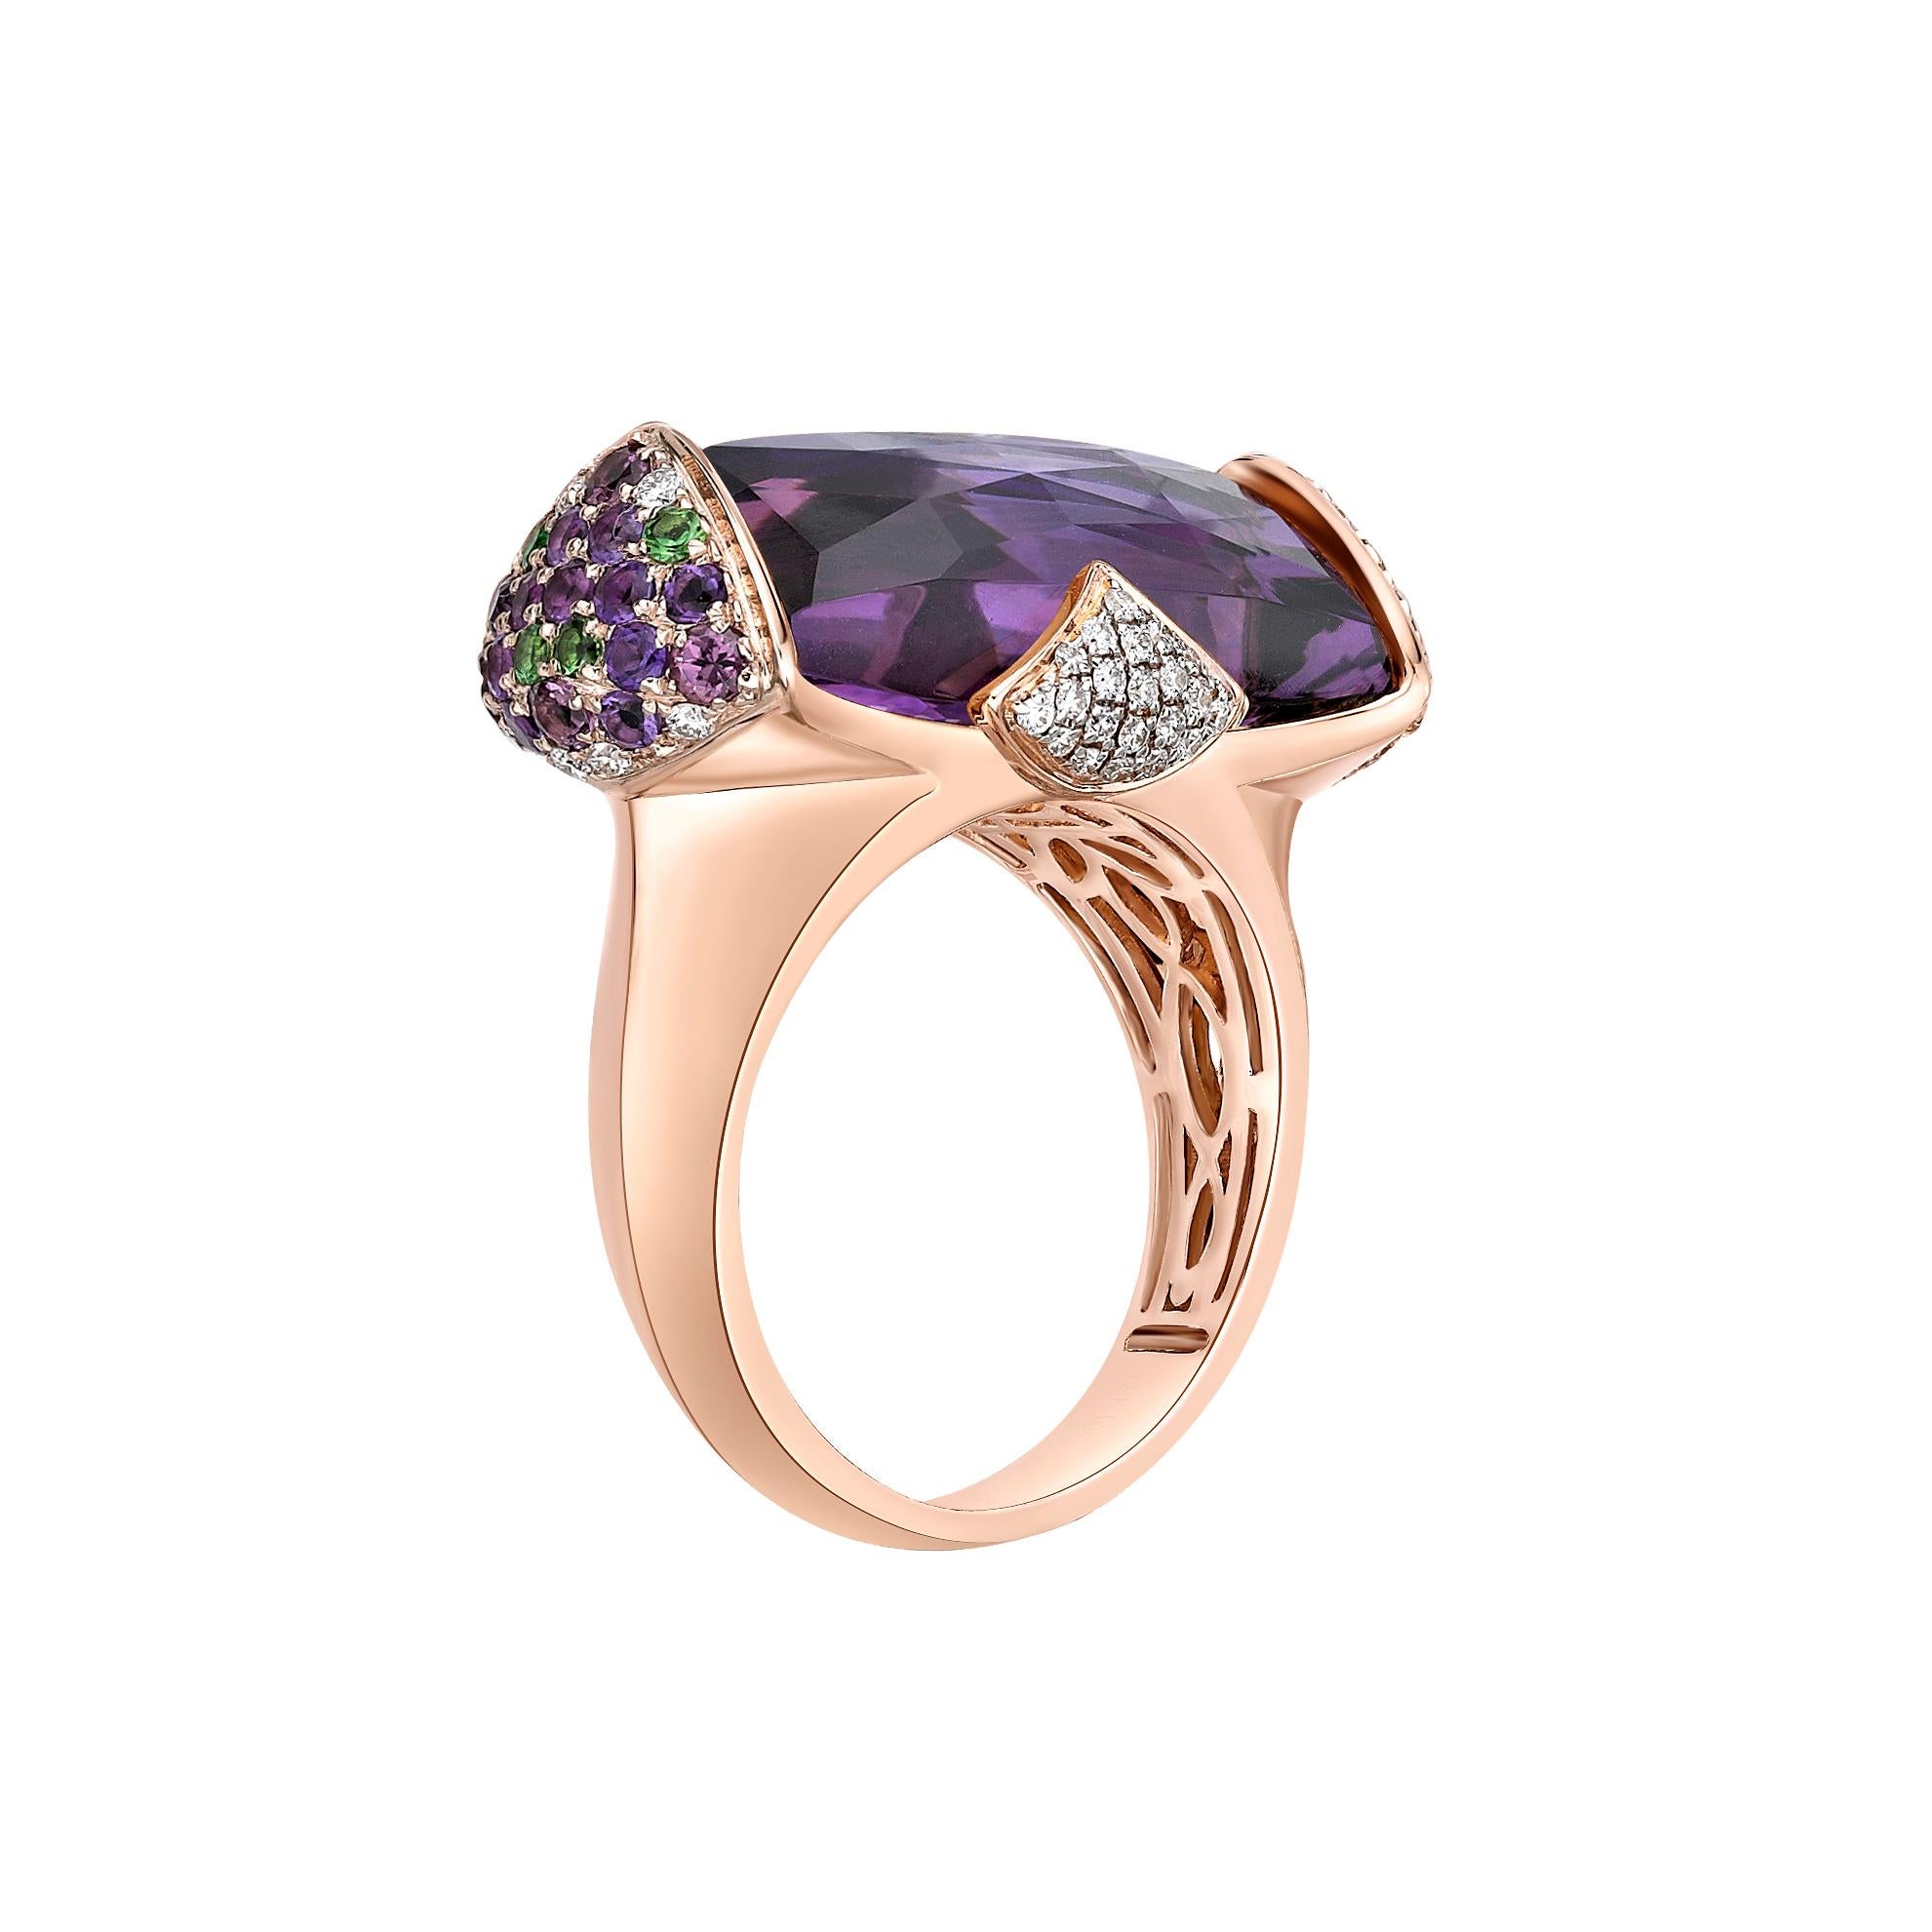 Briolette Cut 46 Carat Amethyst and Diamond Ring and Earring Set in 18 Karat Rose Gold For Sale